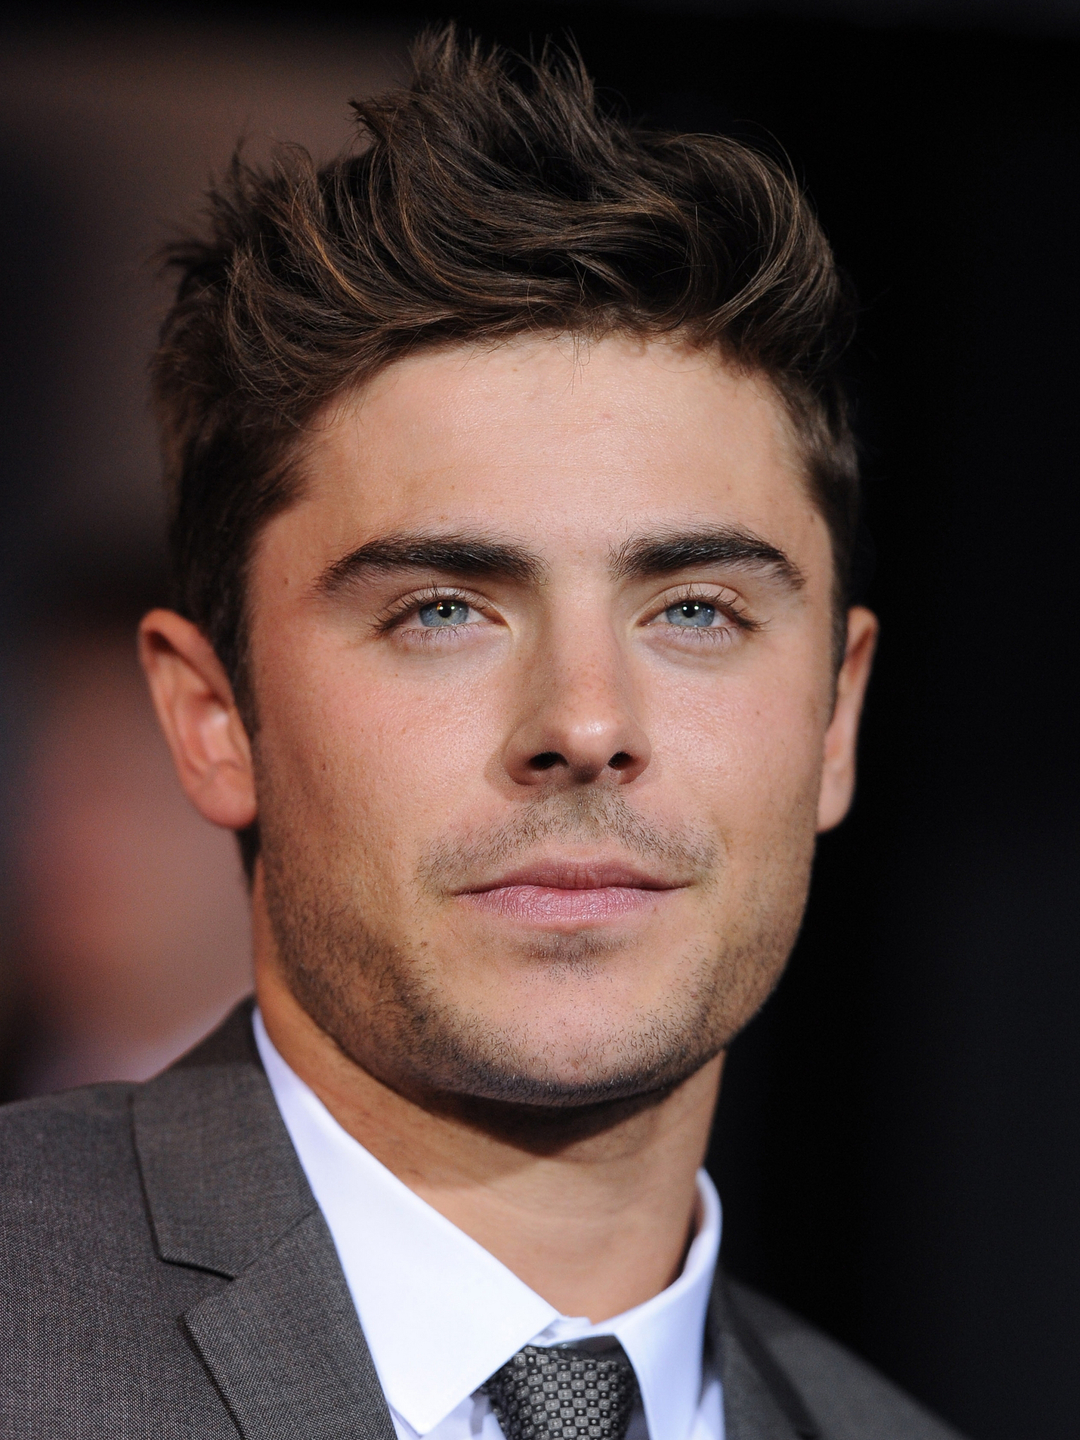 Zac Efron in real life